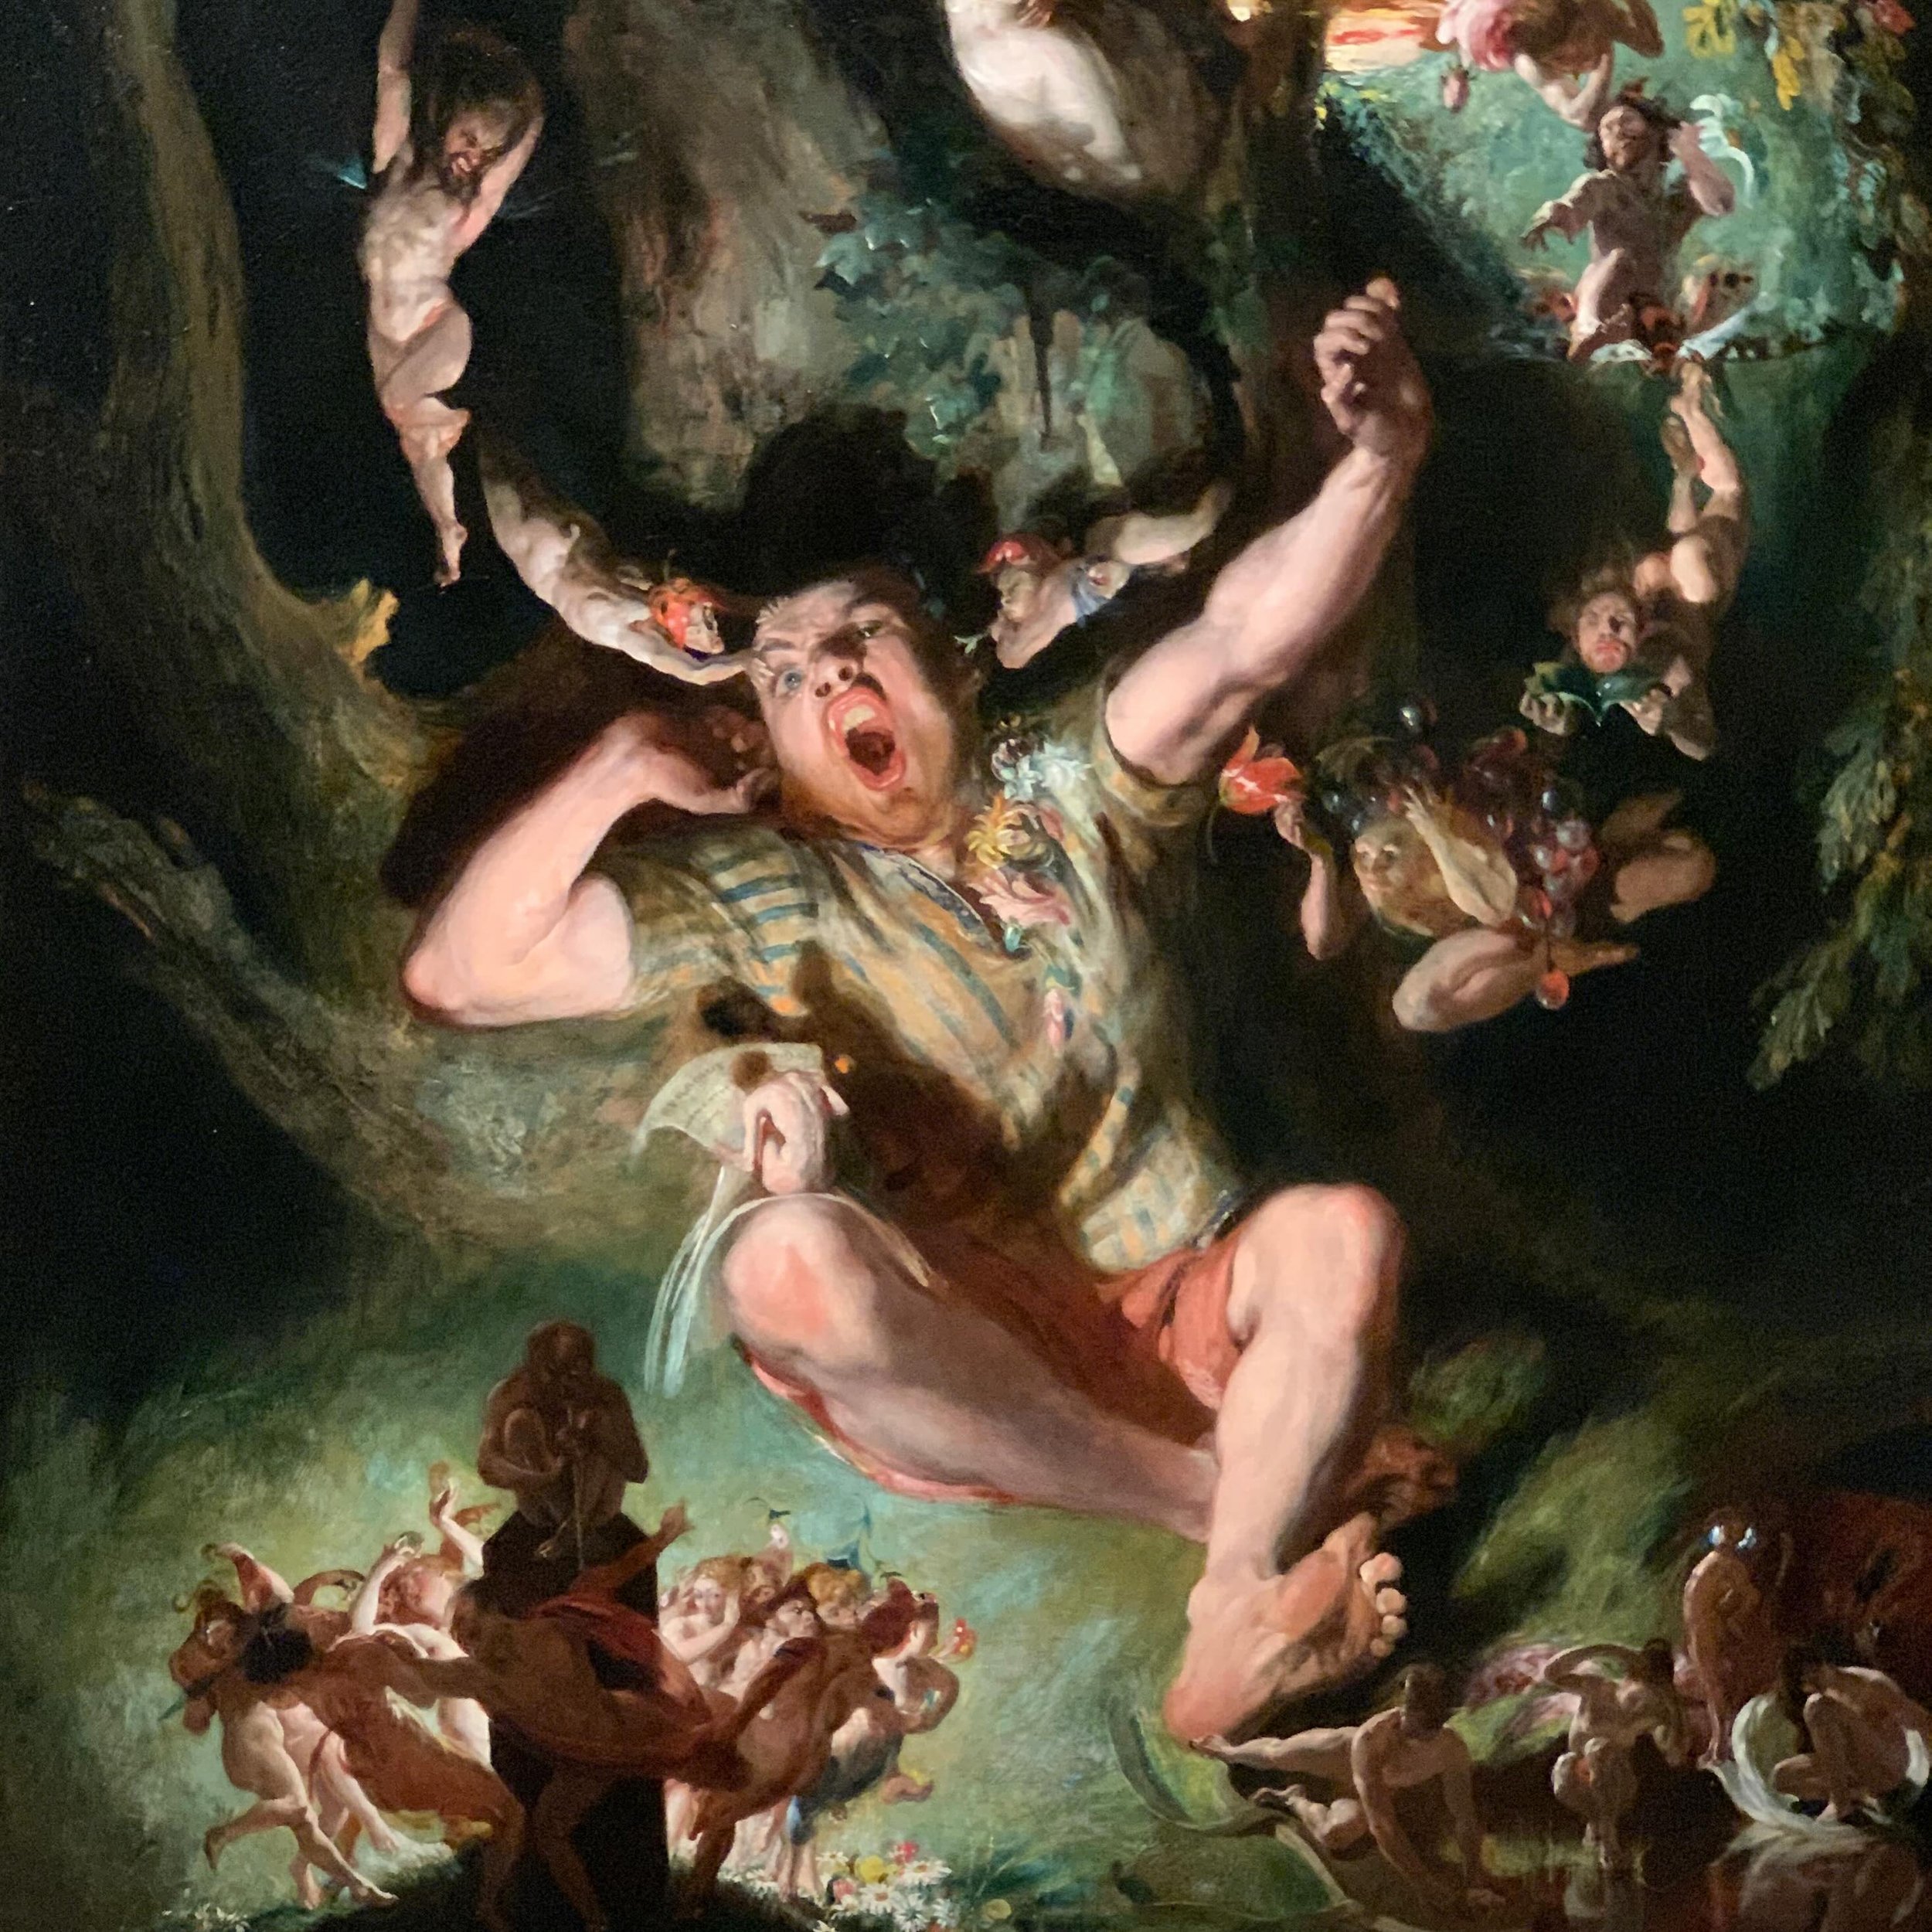 The Disenchantment of Bottom by Daniel Maclise shows the descent of one of my favorite characters in all of literature, Nick Bottom the Weaver, as he becomes human again after sporting the head of a donkey and gaining the affections of Titania, the f